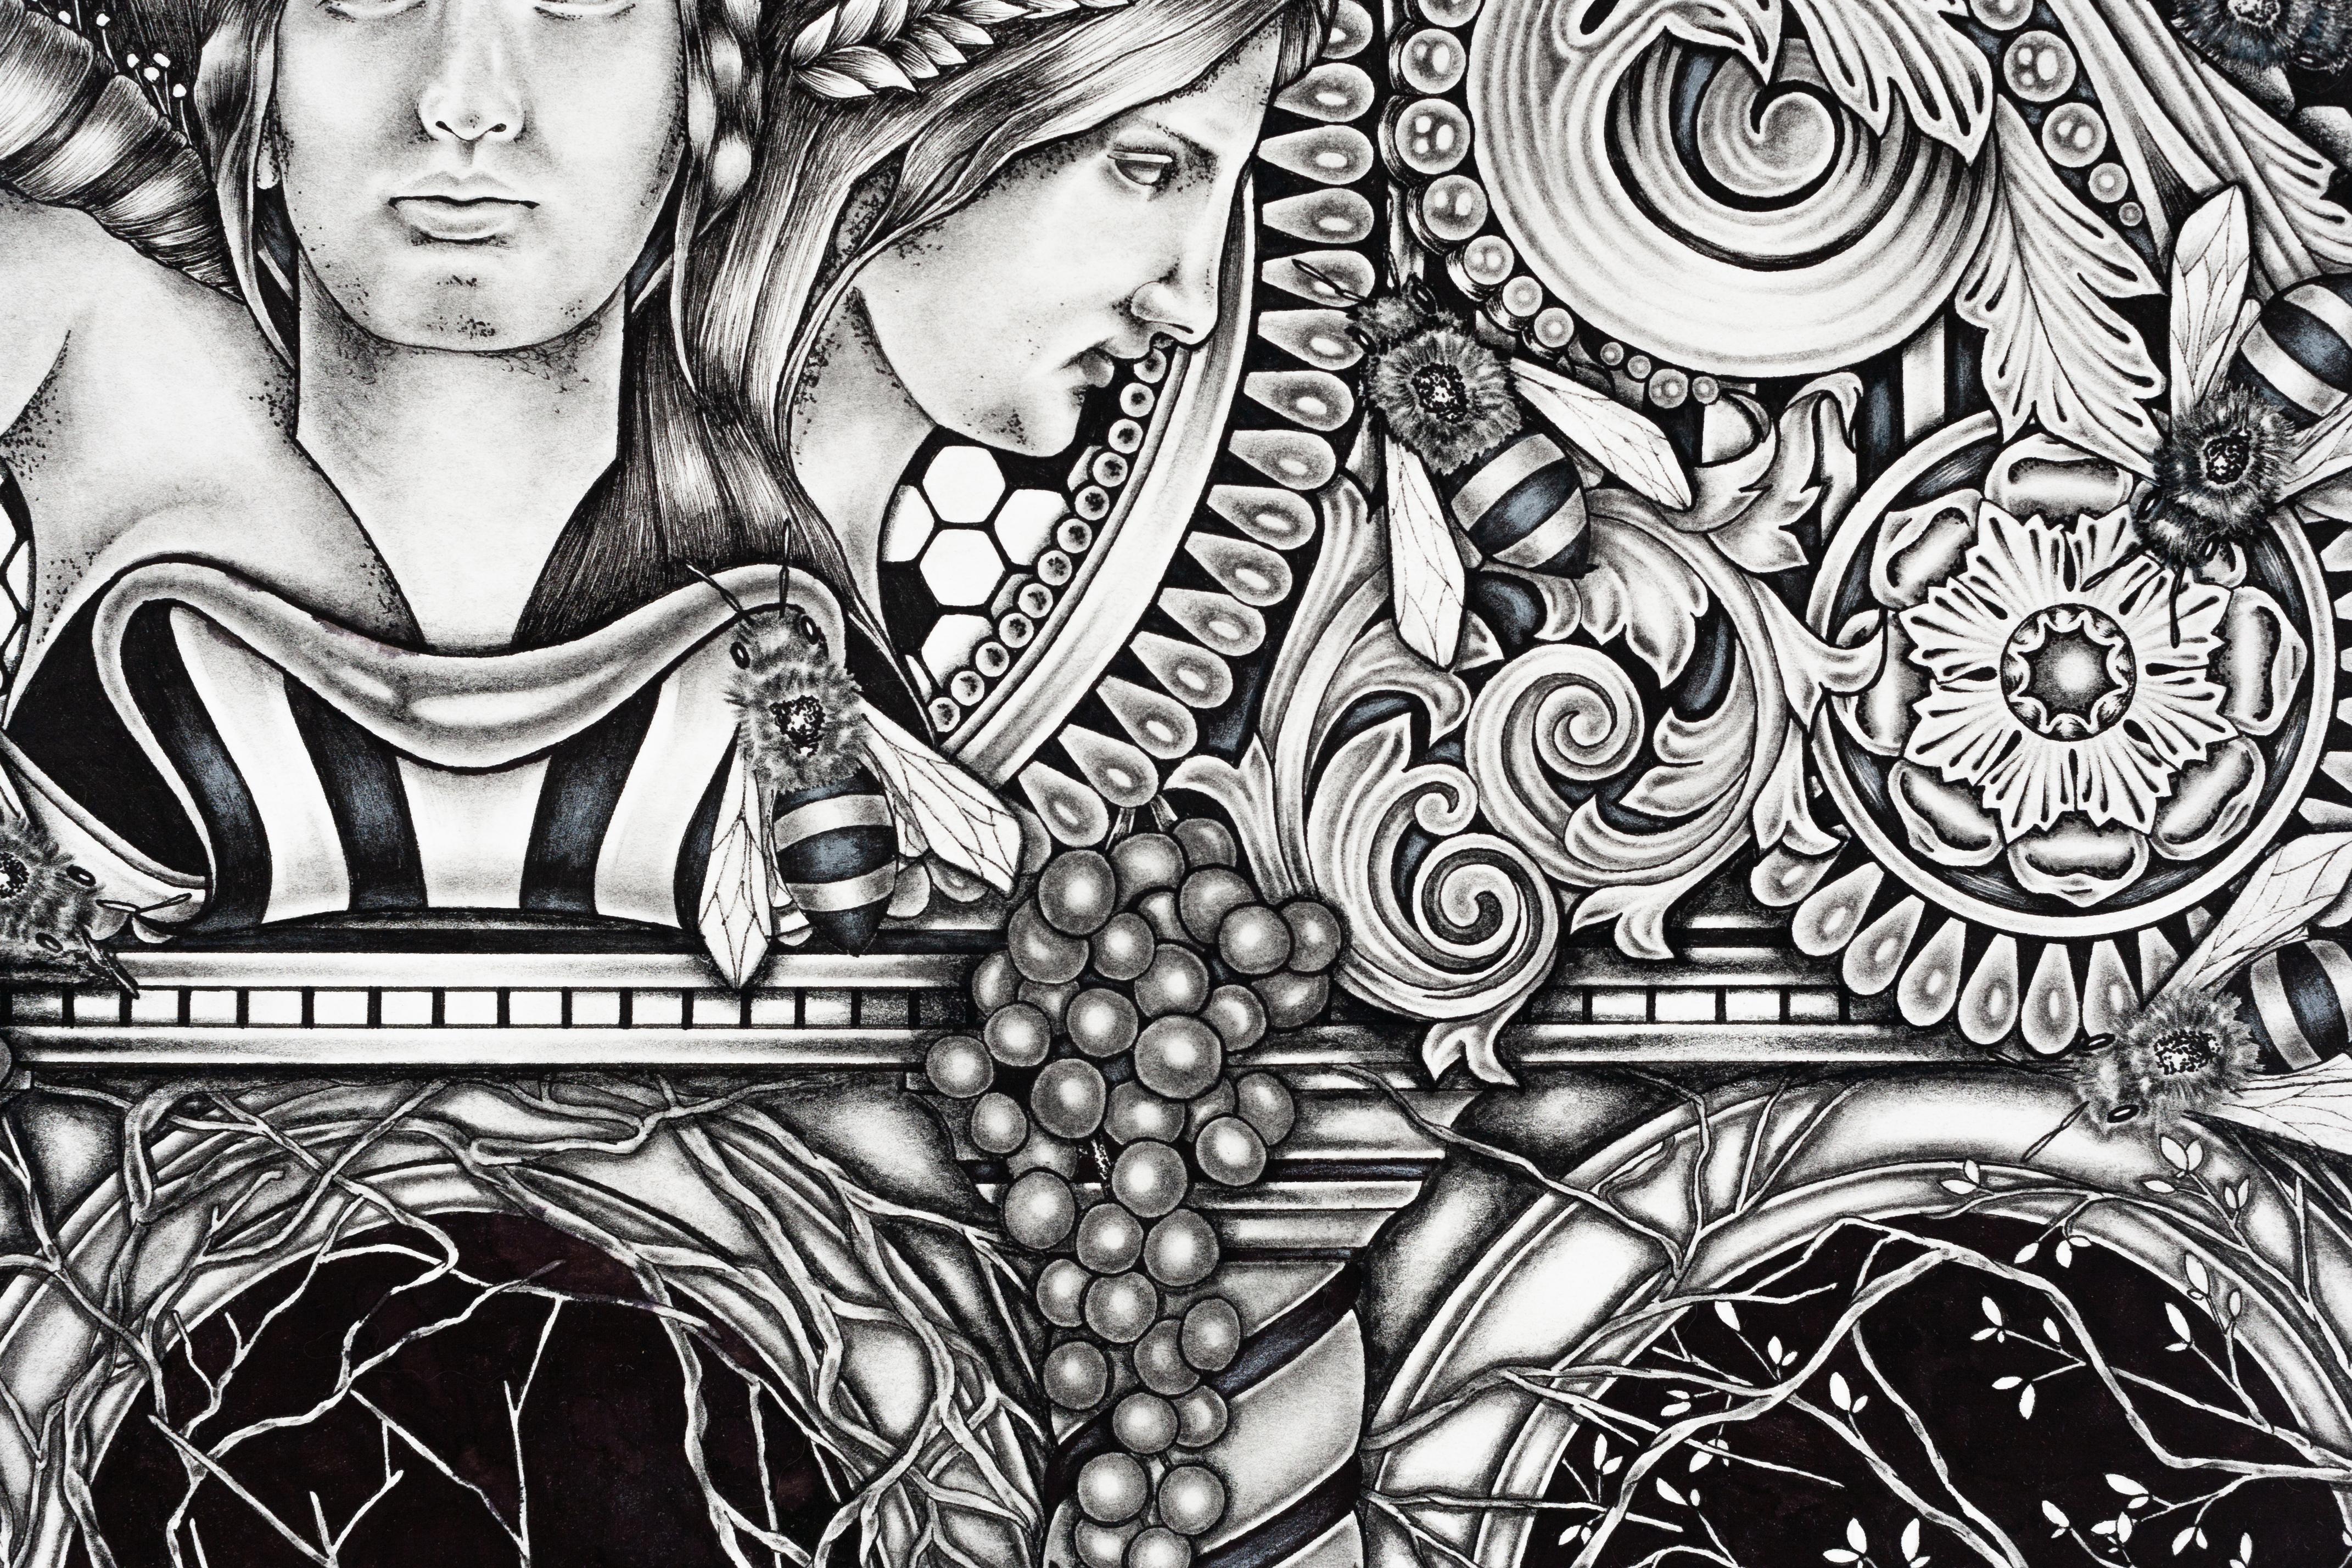 ASHLEE SELBURG
Flora and Pomona
Ink and pencil on paper

42 x 68 inches